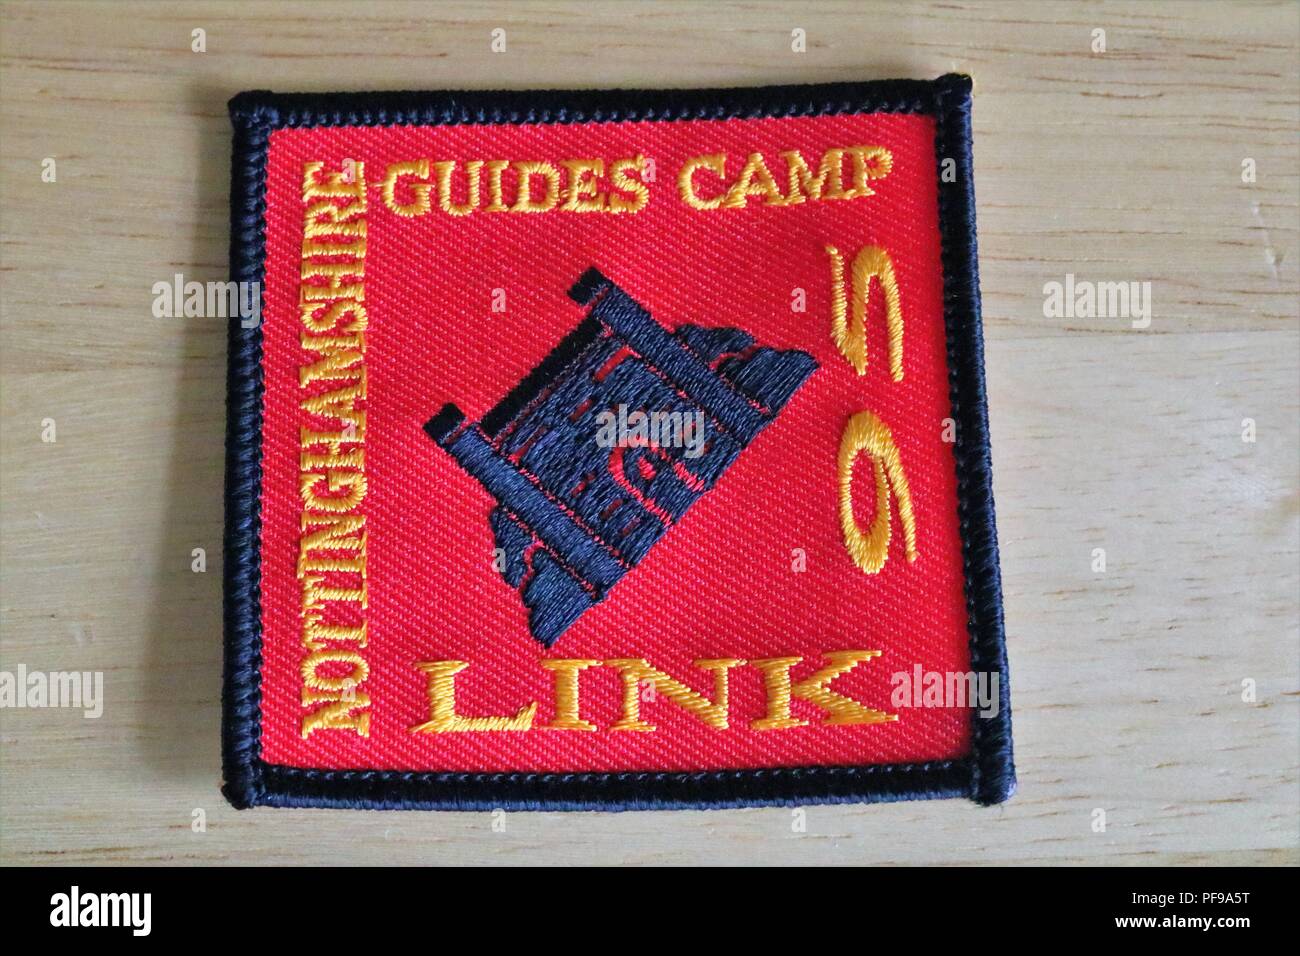 Nottinghamshire Guides Camp Link 95 red, yellow and blue fabric patch Stock Photo